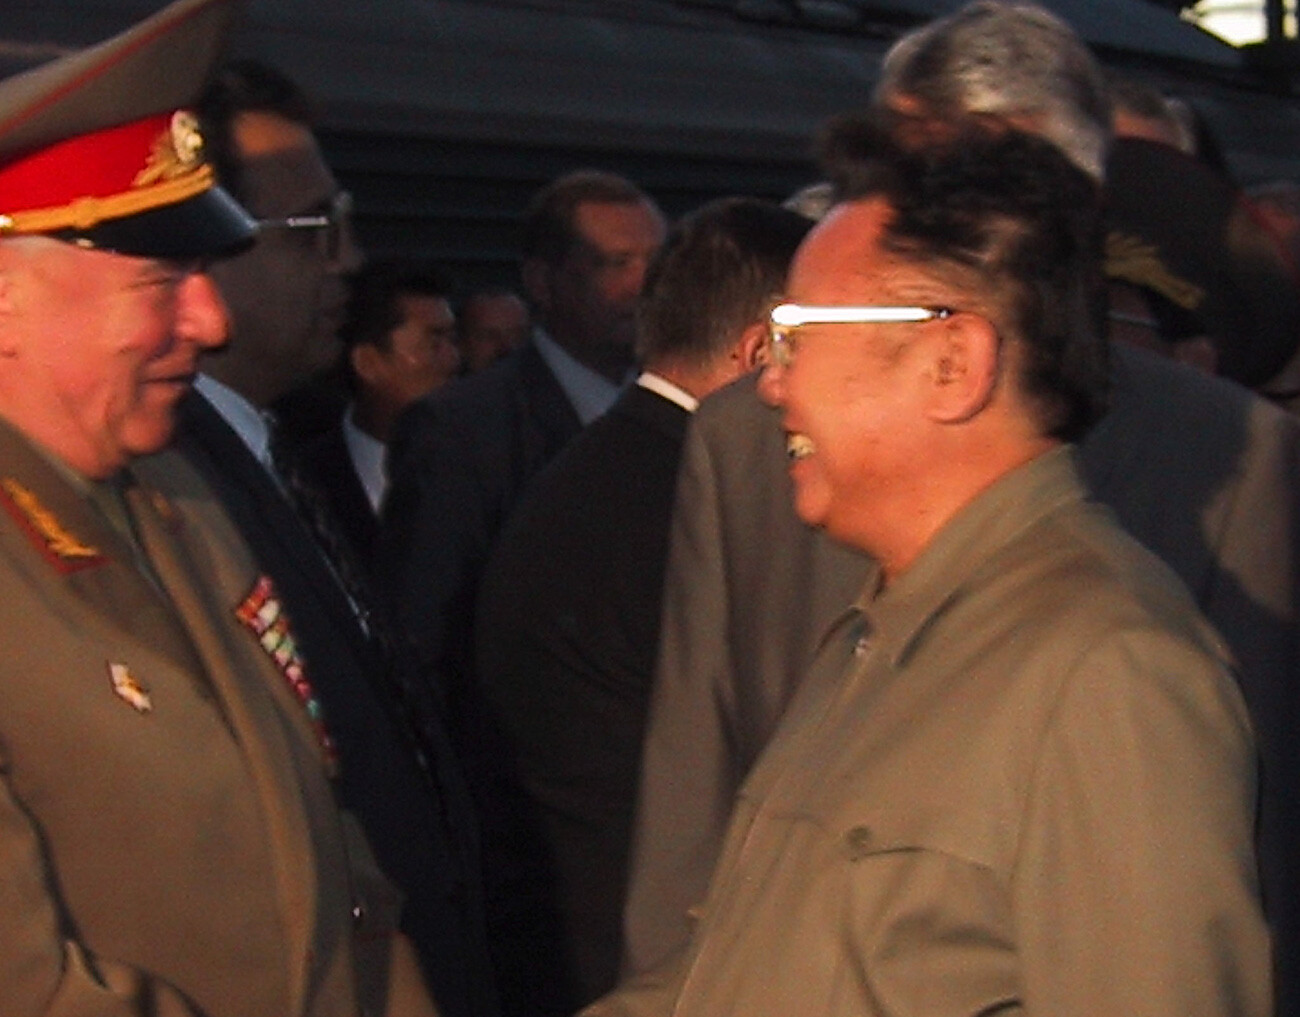 North Korean leader Kim Jong Il (R) greeted by Marshal of the Soviet Union Dmitry Yazov upon his arrival at Moscow's Yaroslavsky railway station.